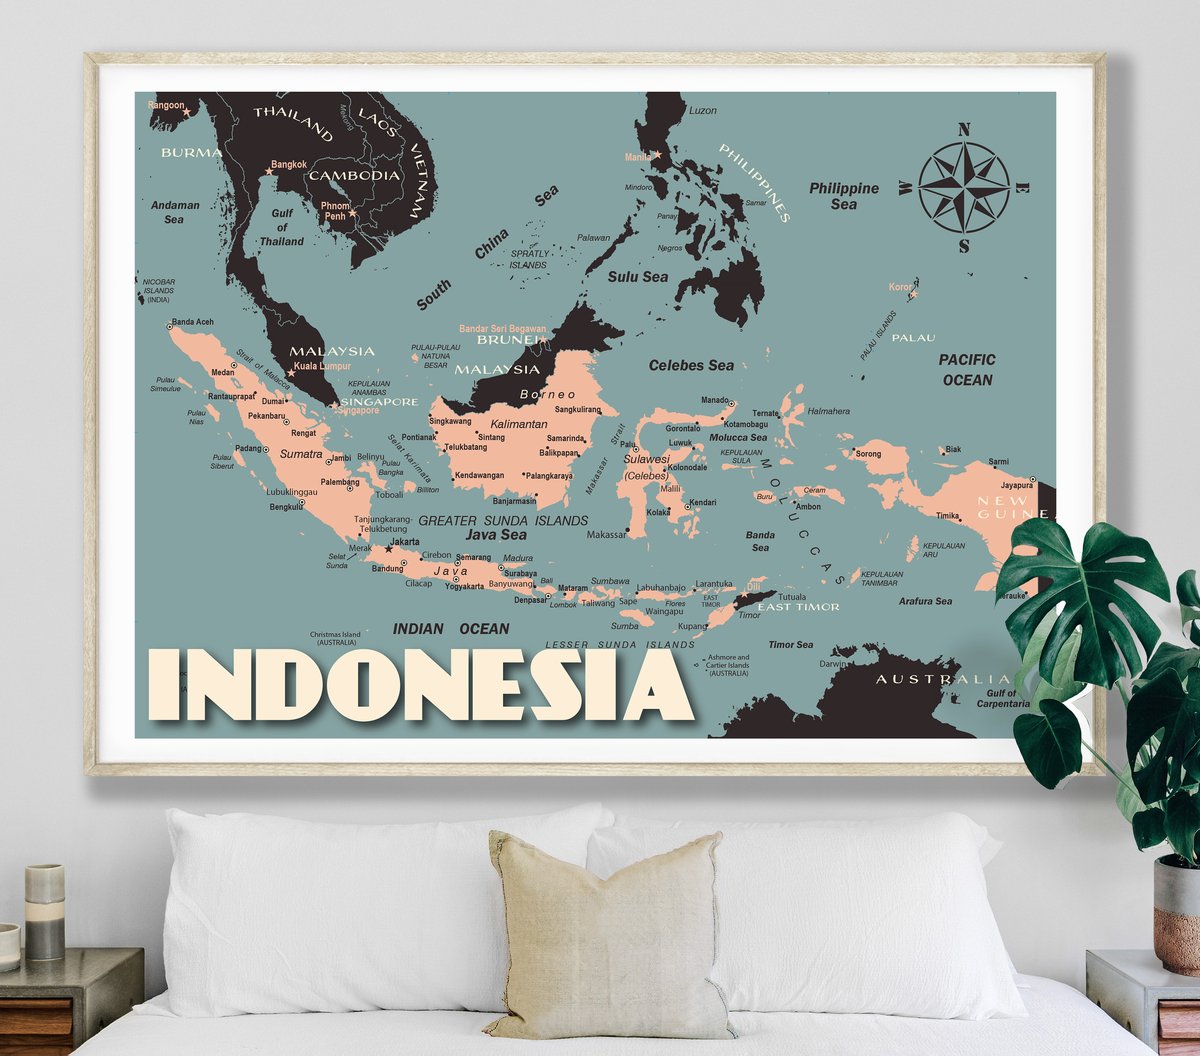 Image of Vintage poster Indonesia Map - Fine Art Print